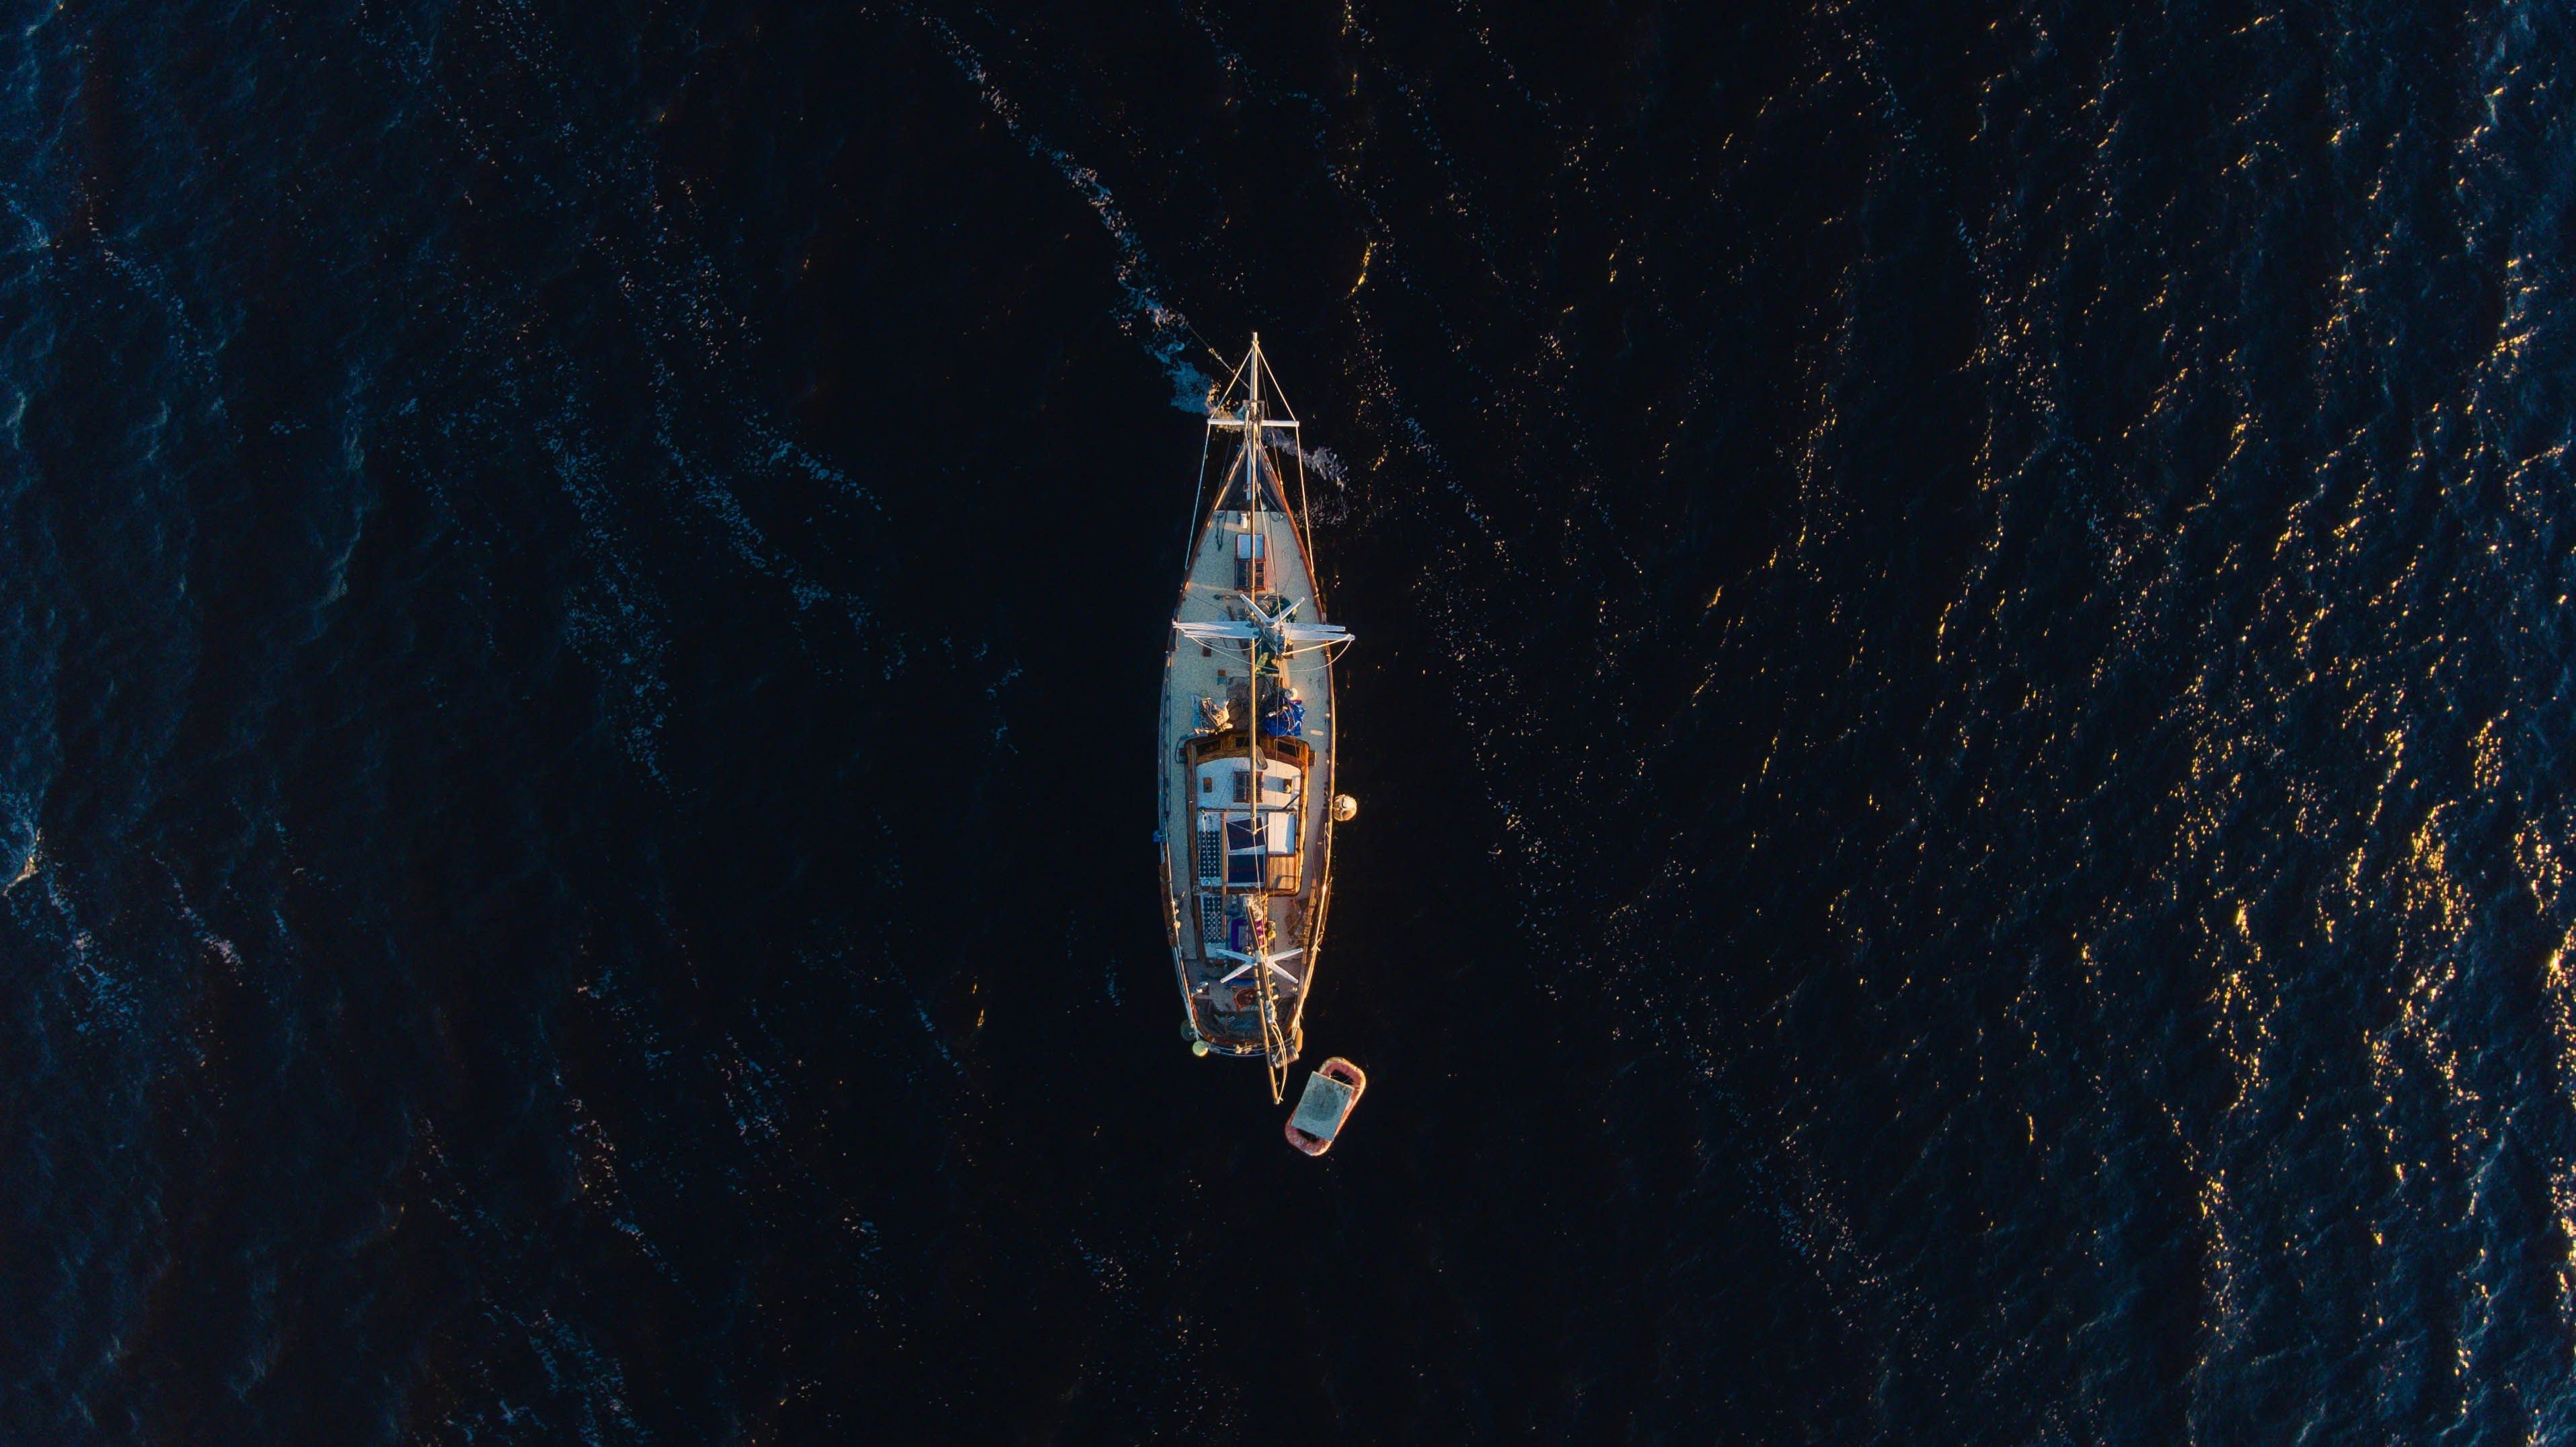 Wallpaper / a drone shot of a boat in the ocean, lost at sea 4k wallpaper